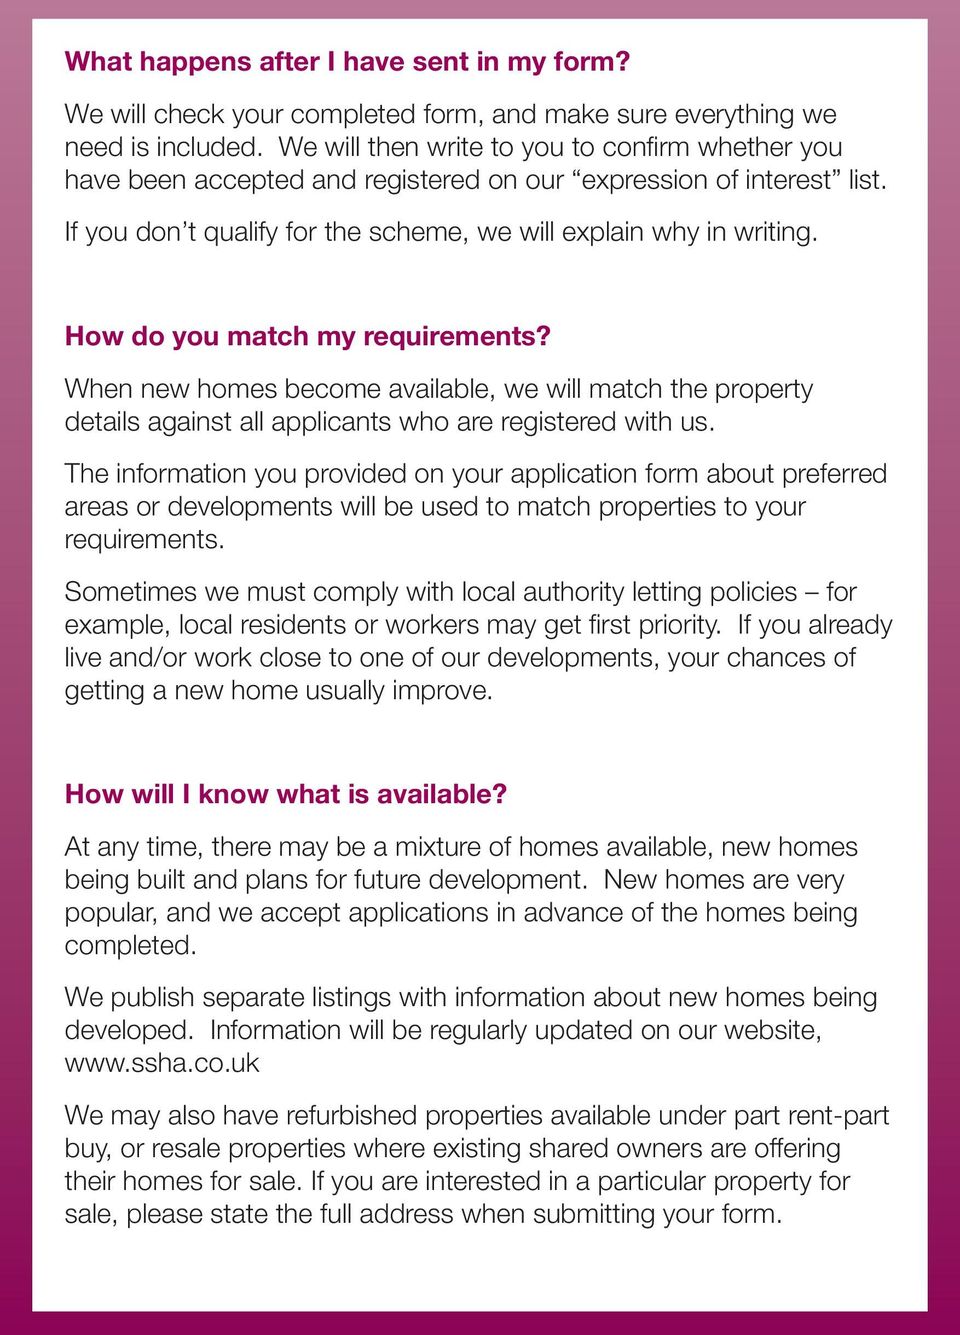 How do you match my requirements? When new homes become available, we will match the property details against all applicants who are registered with us.